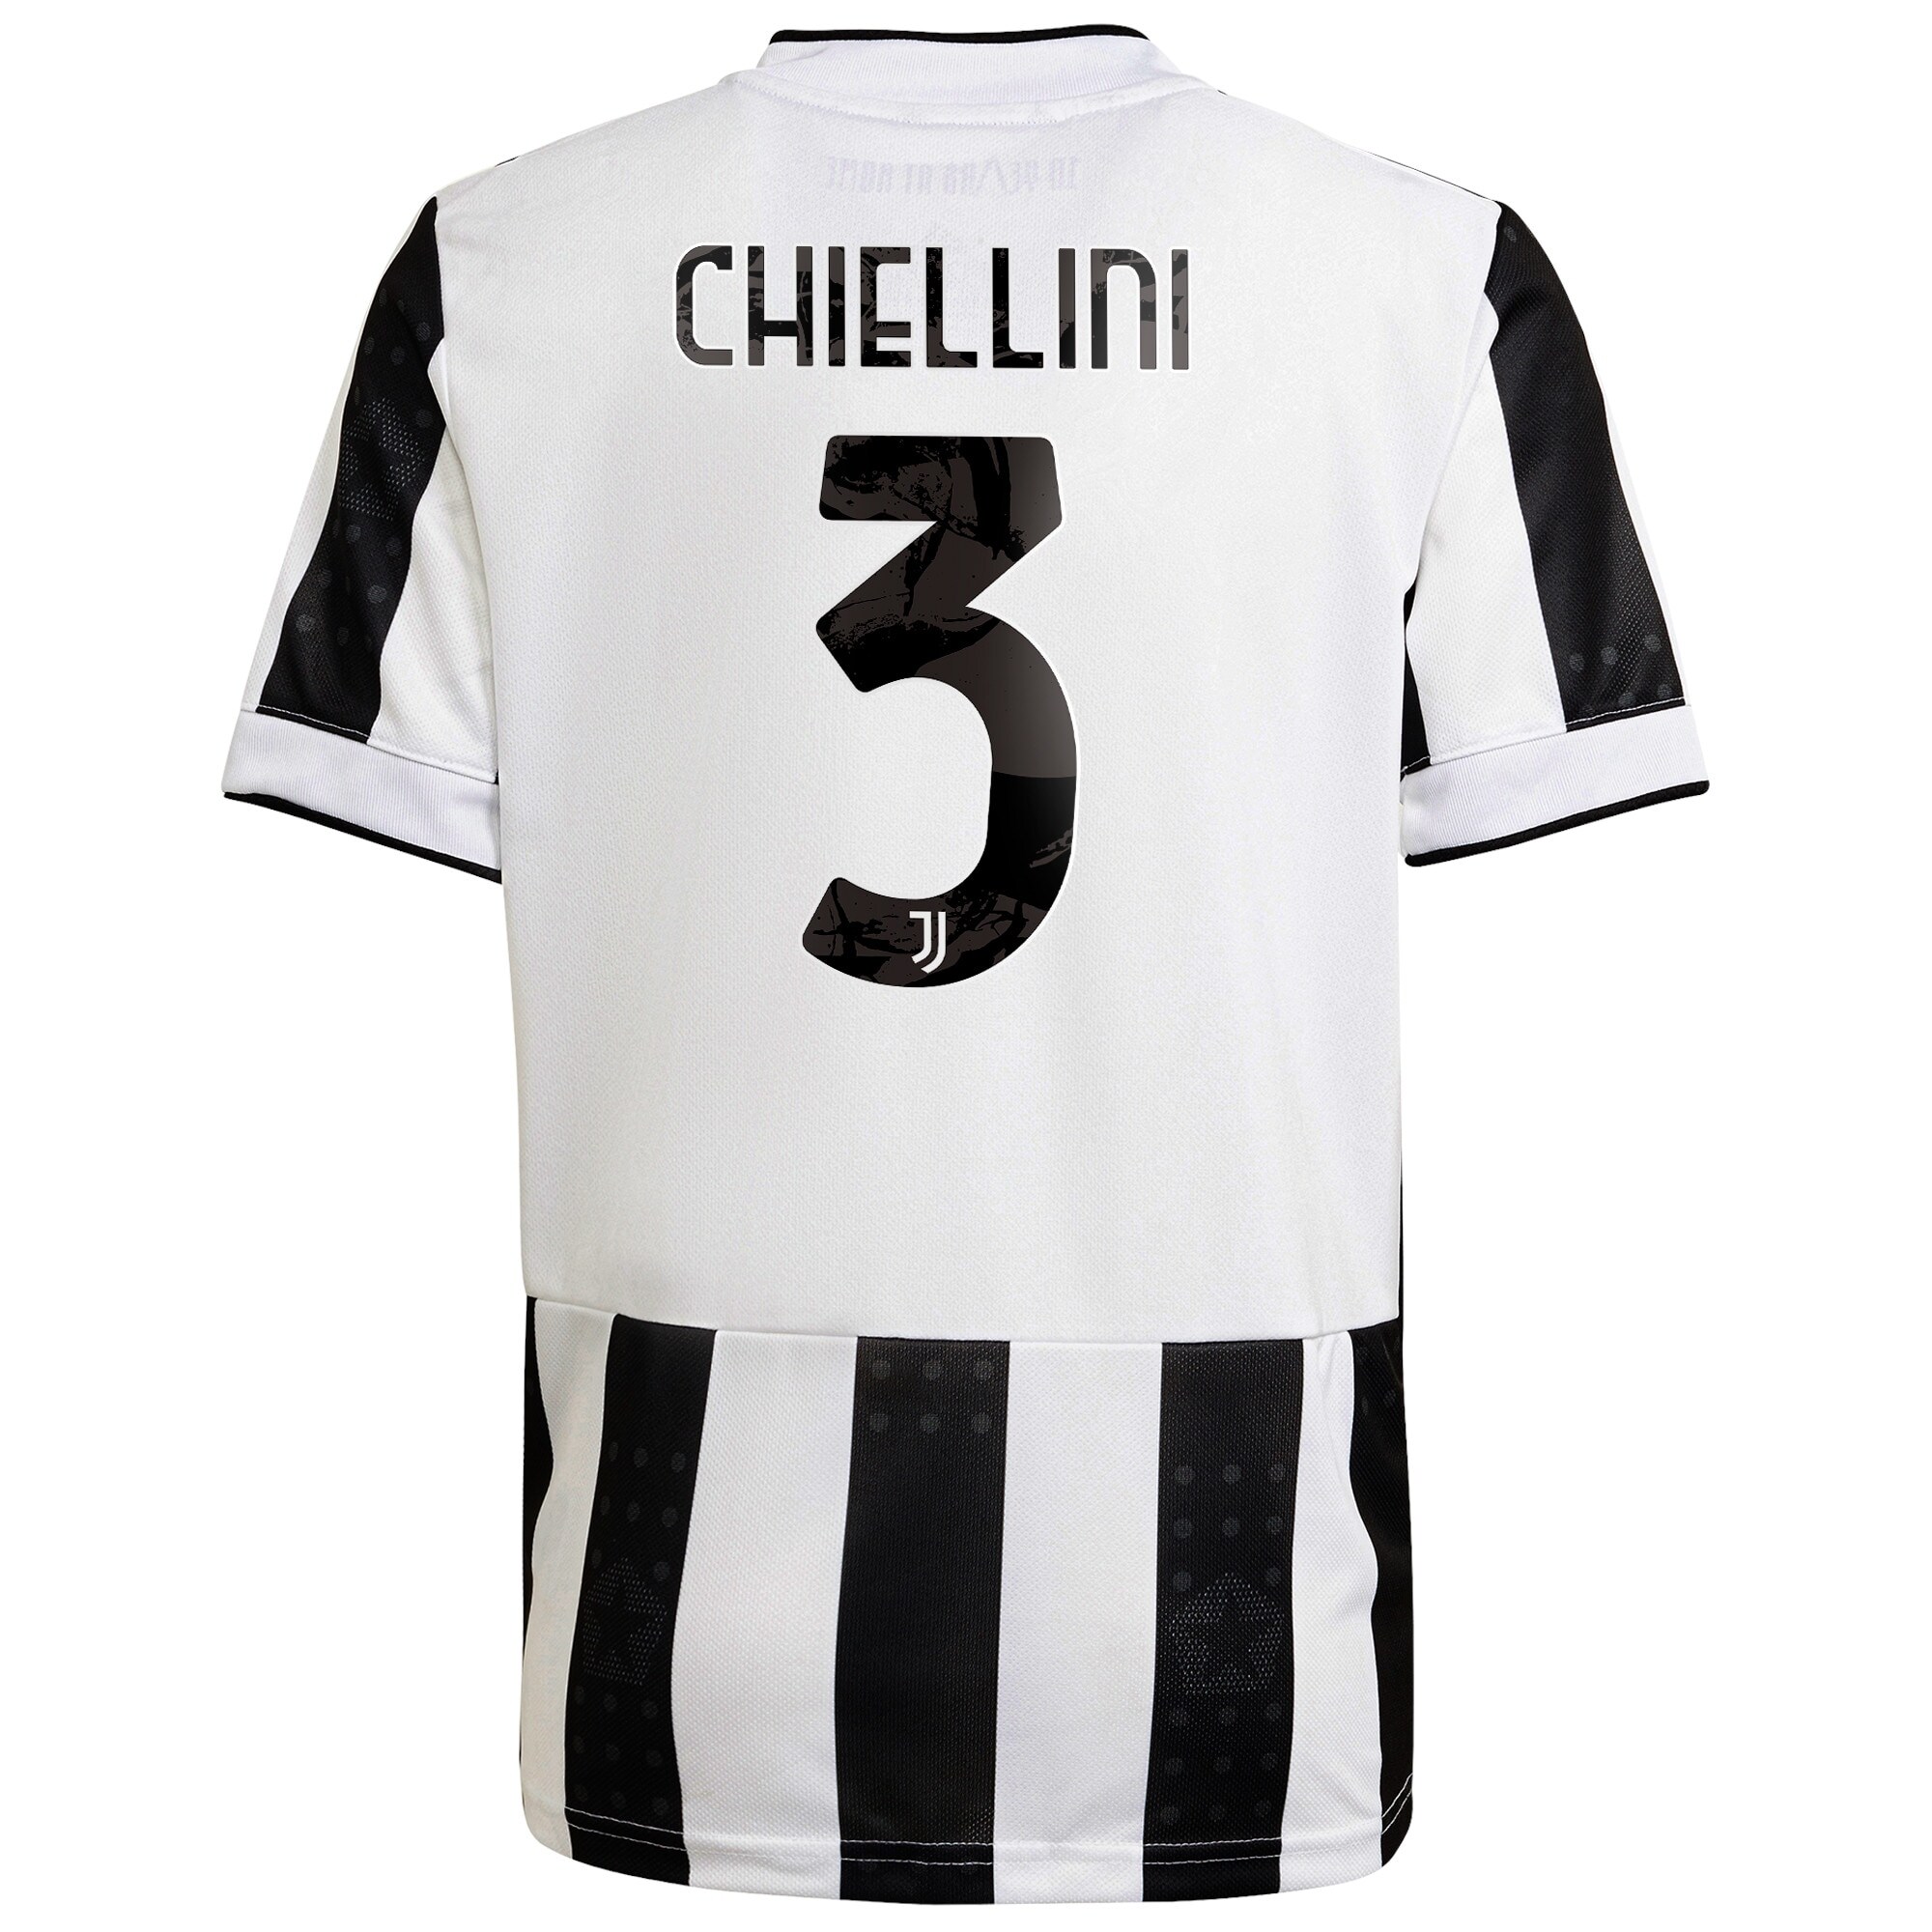 Juventus Home Authentic Shirt 2021-22 with Chiellini 3 printing